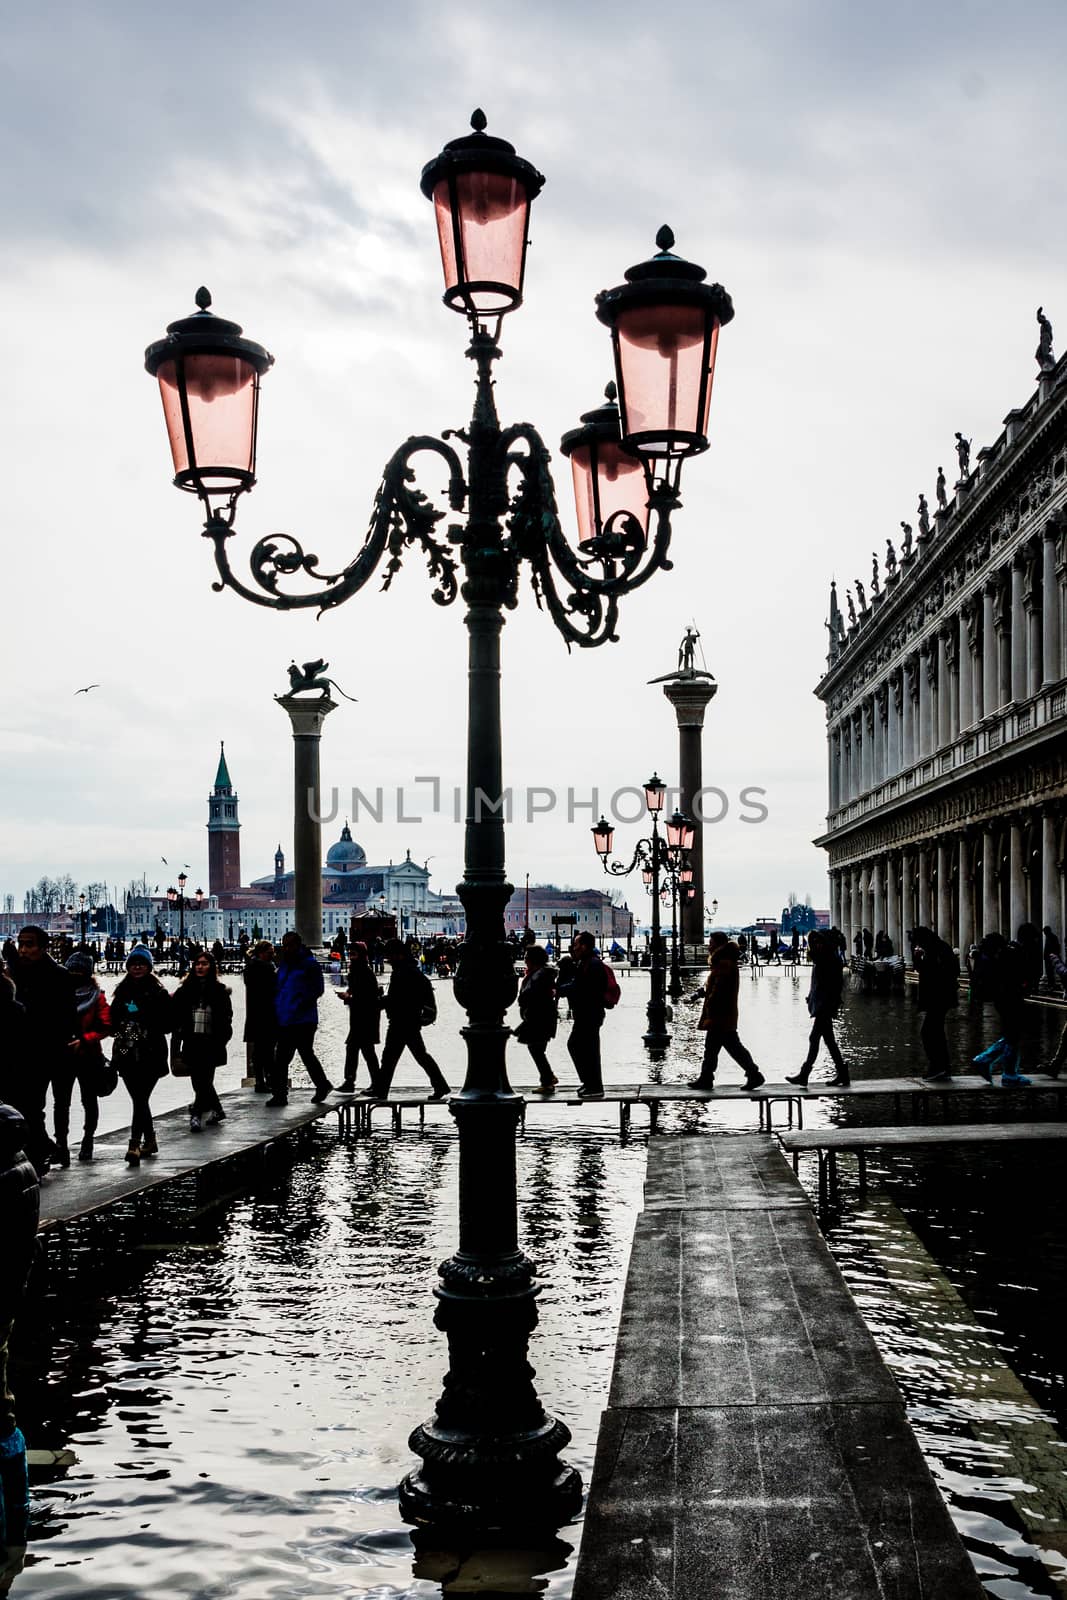 The flooded Piazza San Marco, in Venice, Veneto, Italy